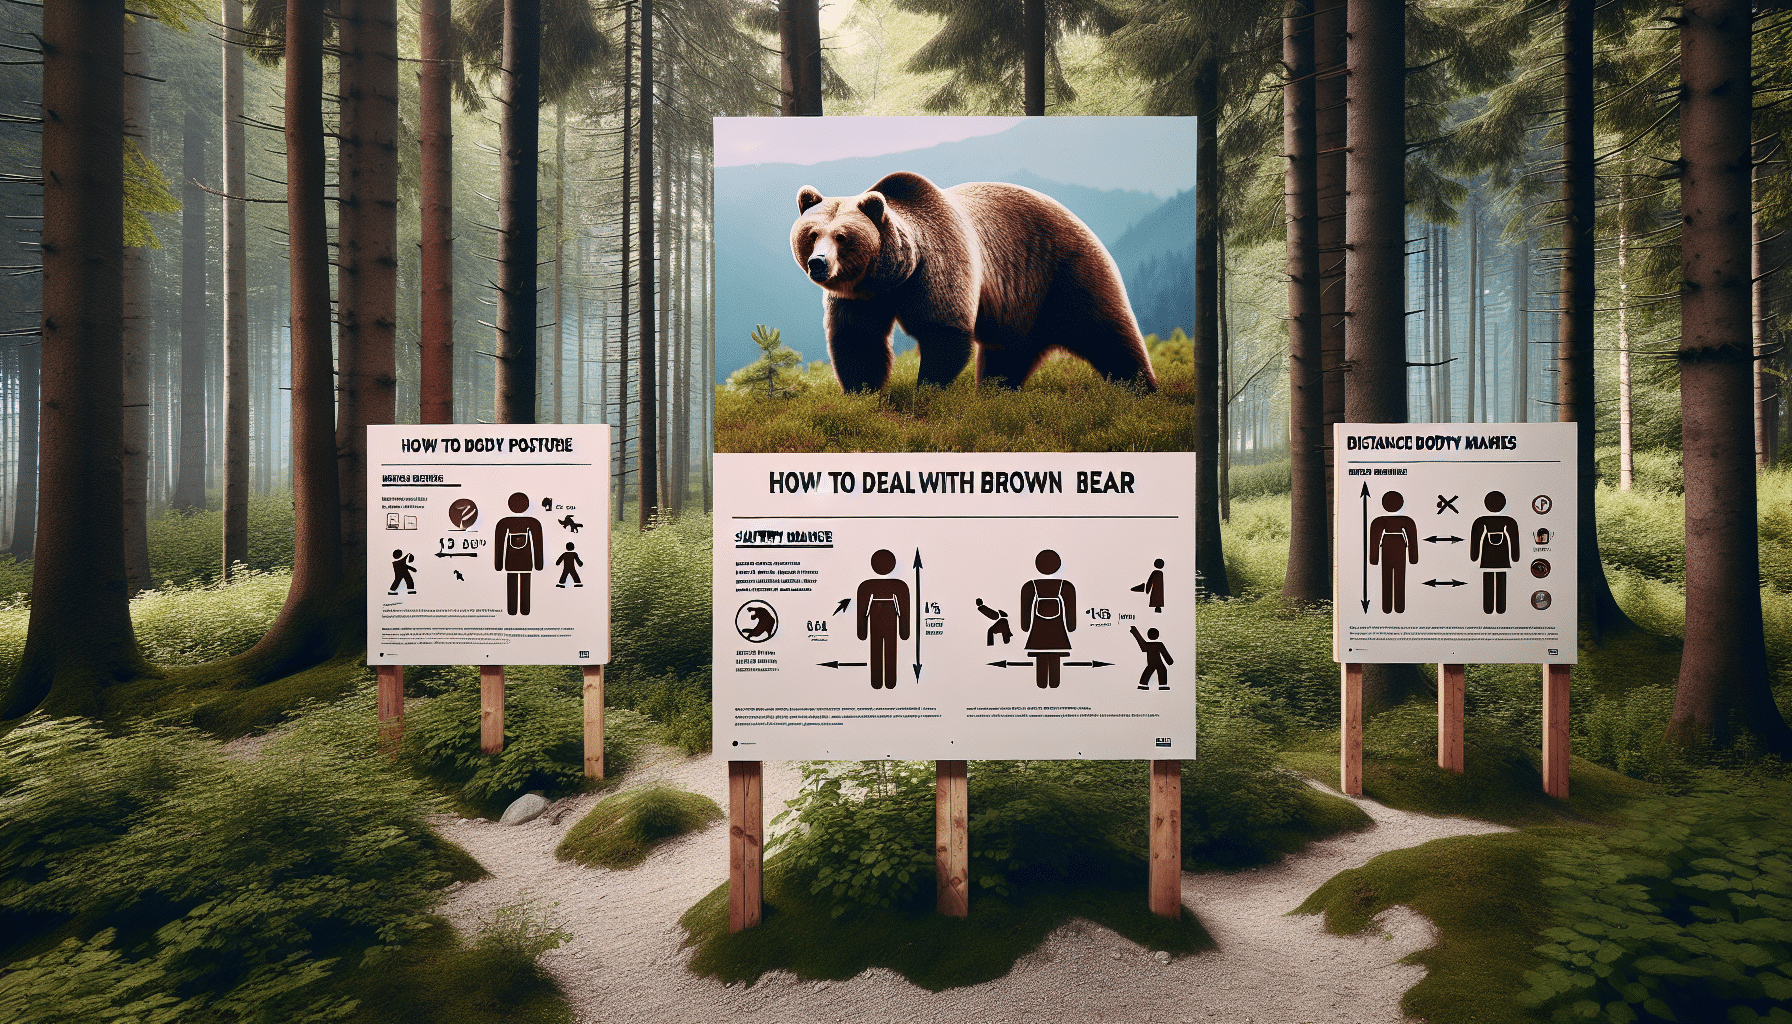 An informative visual scene dedicated to 'How to Deal With Brown Bears' without any people present. Imagine a tranquil forest environment with towering evergreen trees and lush undergrowth. In the foreground, deliberately place several placards (without text) demonstrating safety measures when encountering a brown bear. They can depict drawn figures showing correct body postures, distance measures, and other vital information, void of any brand names or logos. Capture the essence of a brown bear majestically roaming far in the background, plausibly emblematic of the wildlife prevalent in the area.